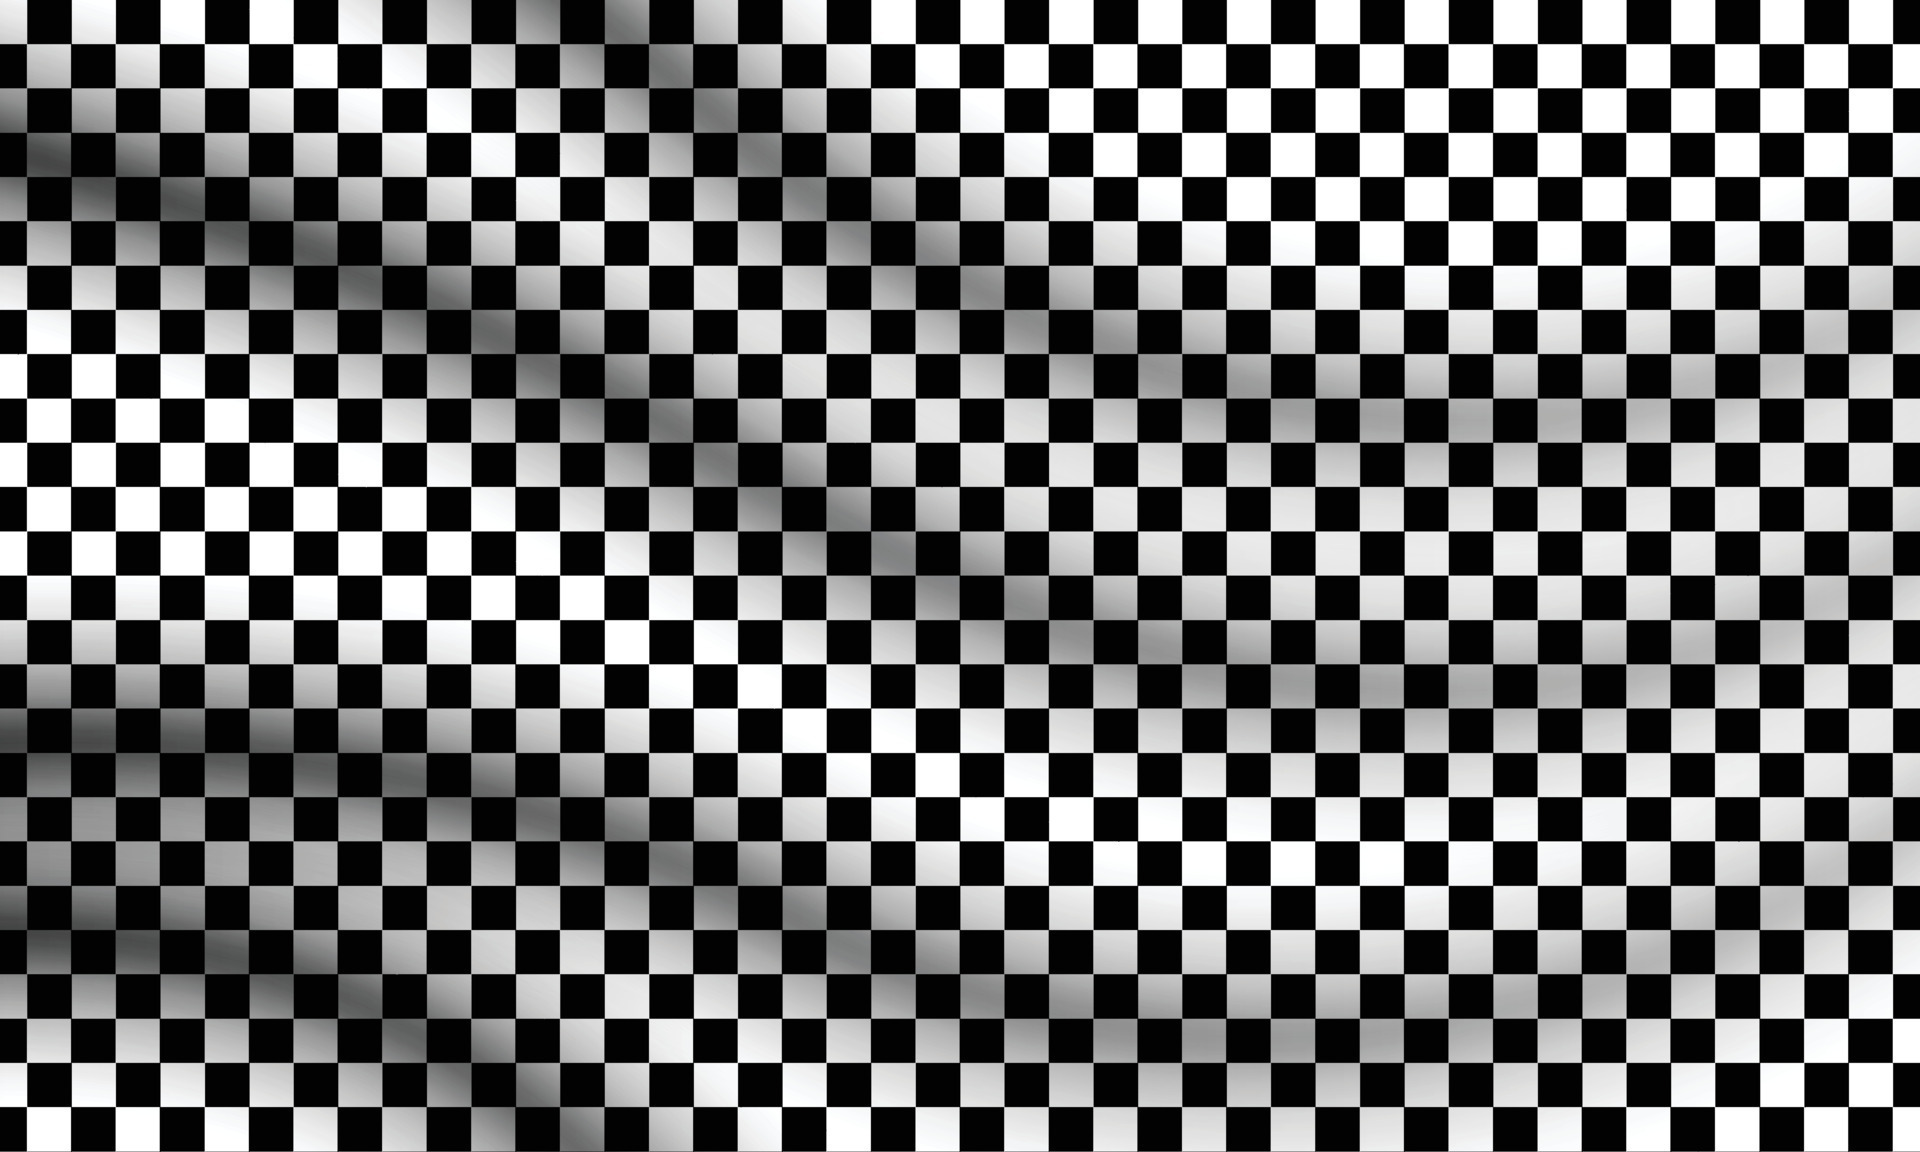 Aggregate more than 61 checkered flag wallpaper best - in.cdgdbentre